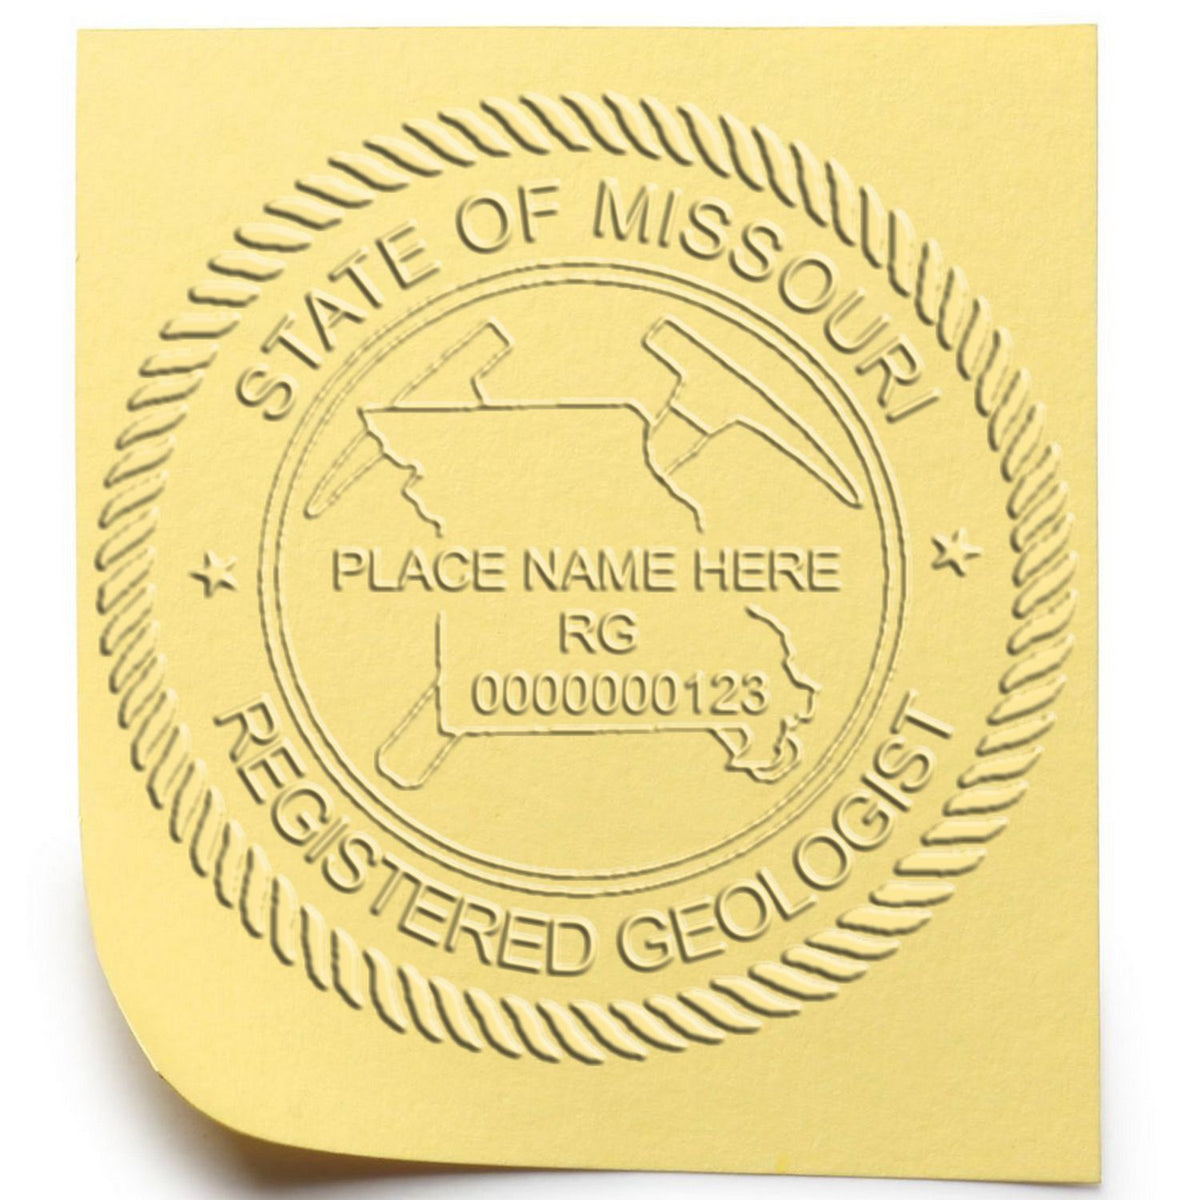 An alternative view of the Soft Missouri Professional Geologist Seal stamped on a sheet of paper showing the image in use